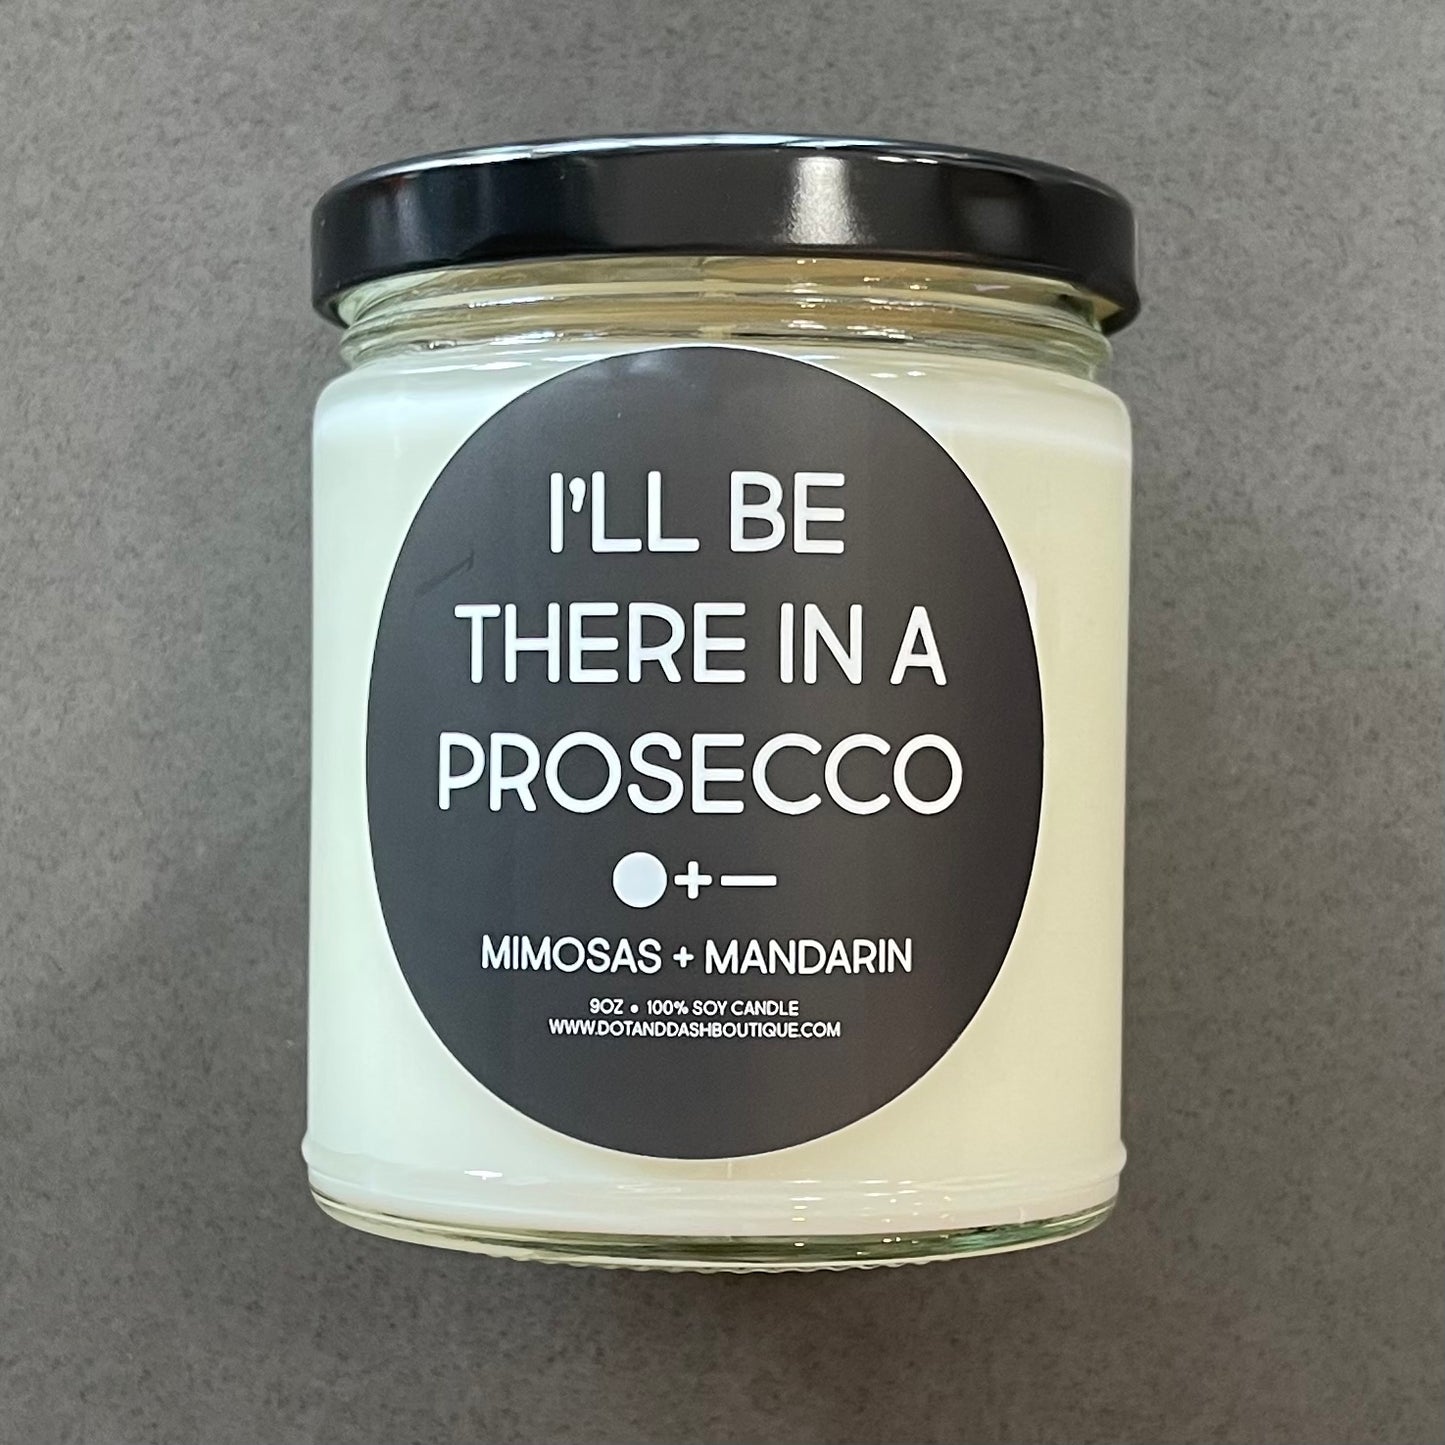 The In A Prosecco Candle